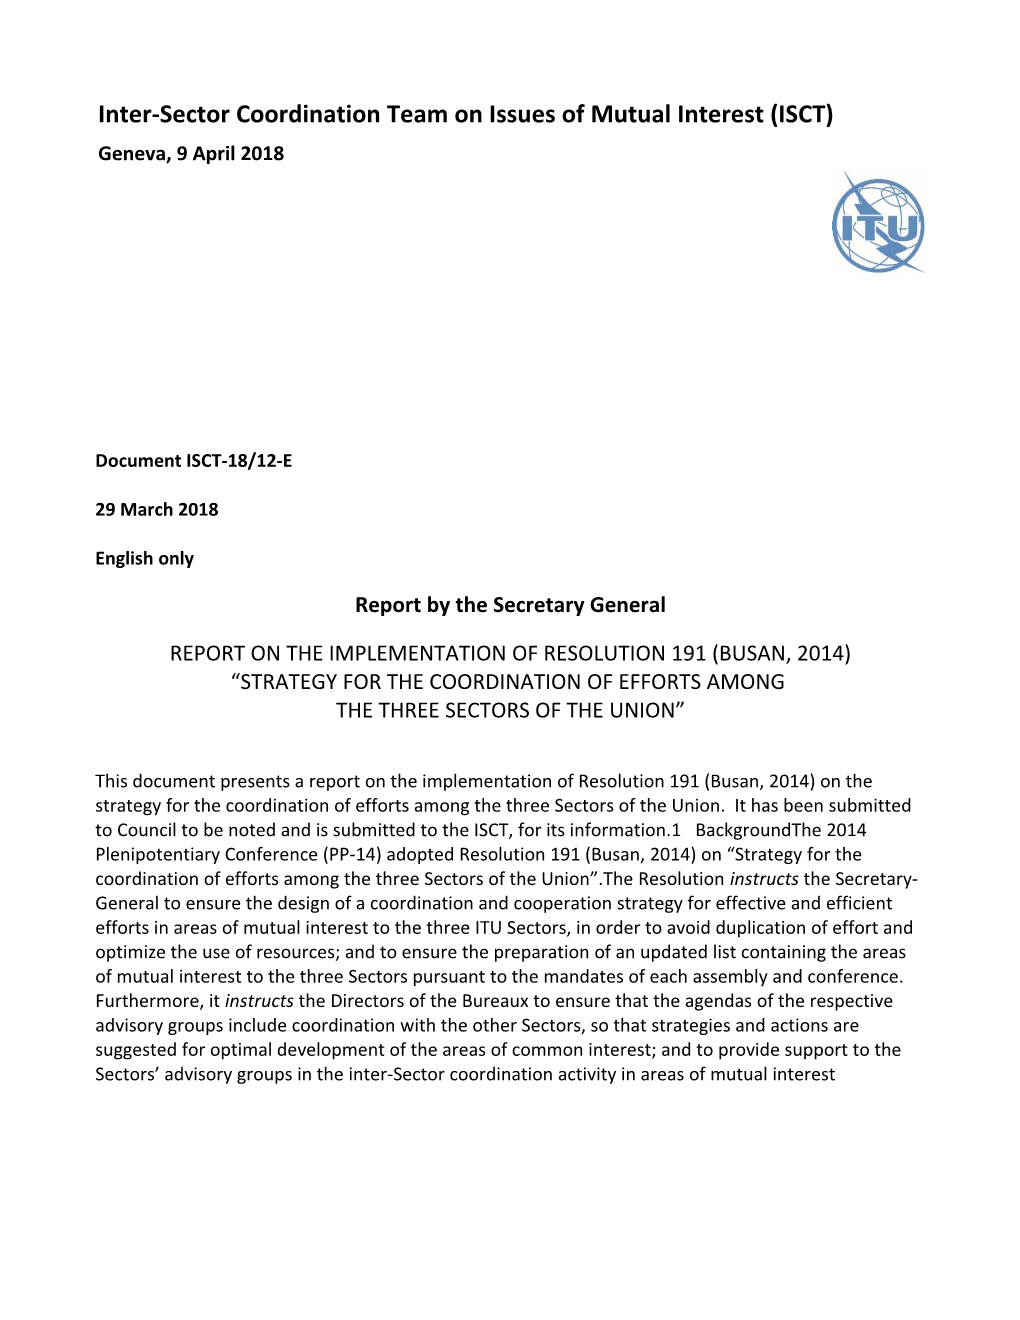 This Document Presents a Report on the Implementation of Resolution 191 (Busan, 2014) On